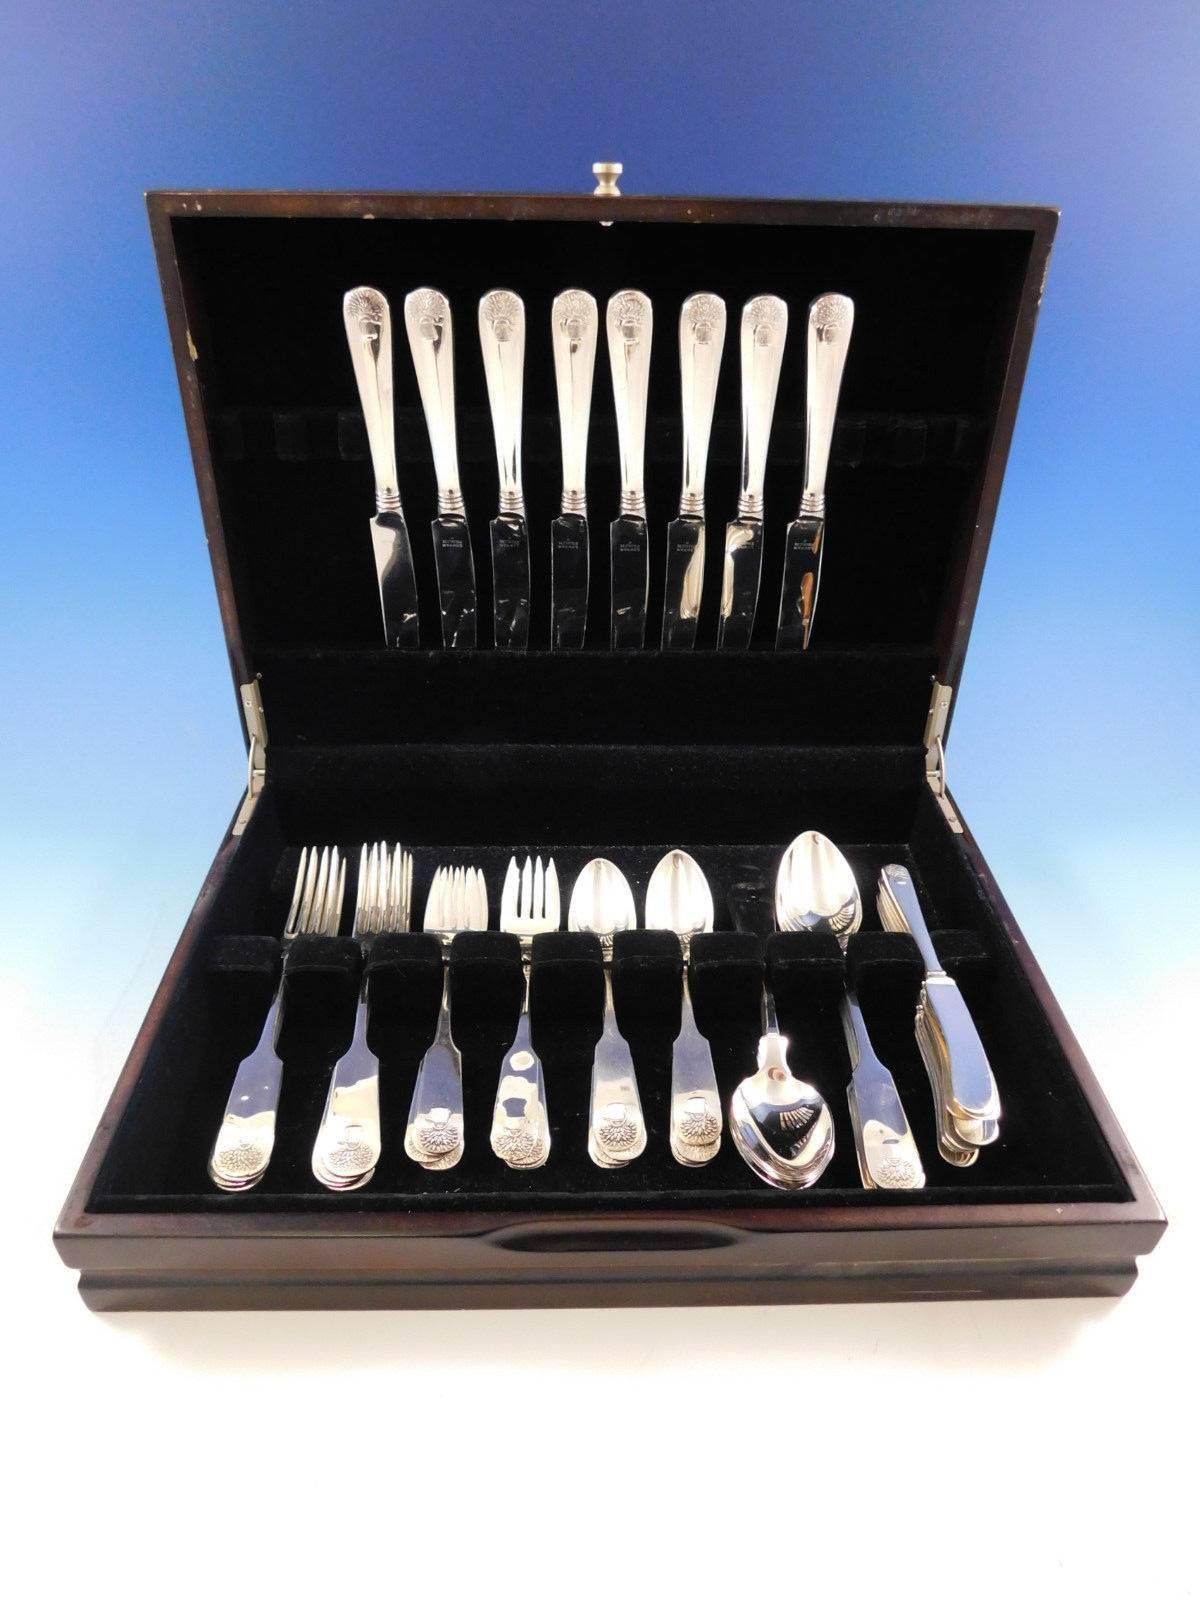 Sheaf of Wheat by Durgin-Gorham sterling silver Flatware set, 48 pieces. This set includes: 

8 Knives, 8 7/8